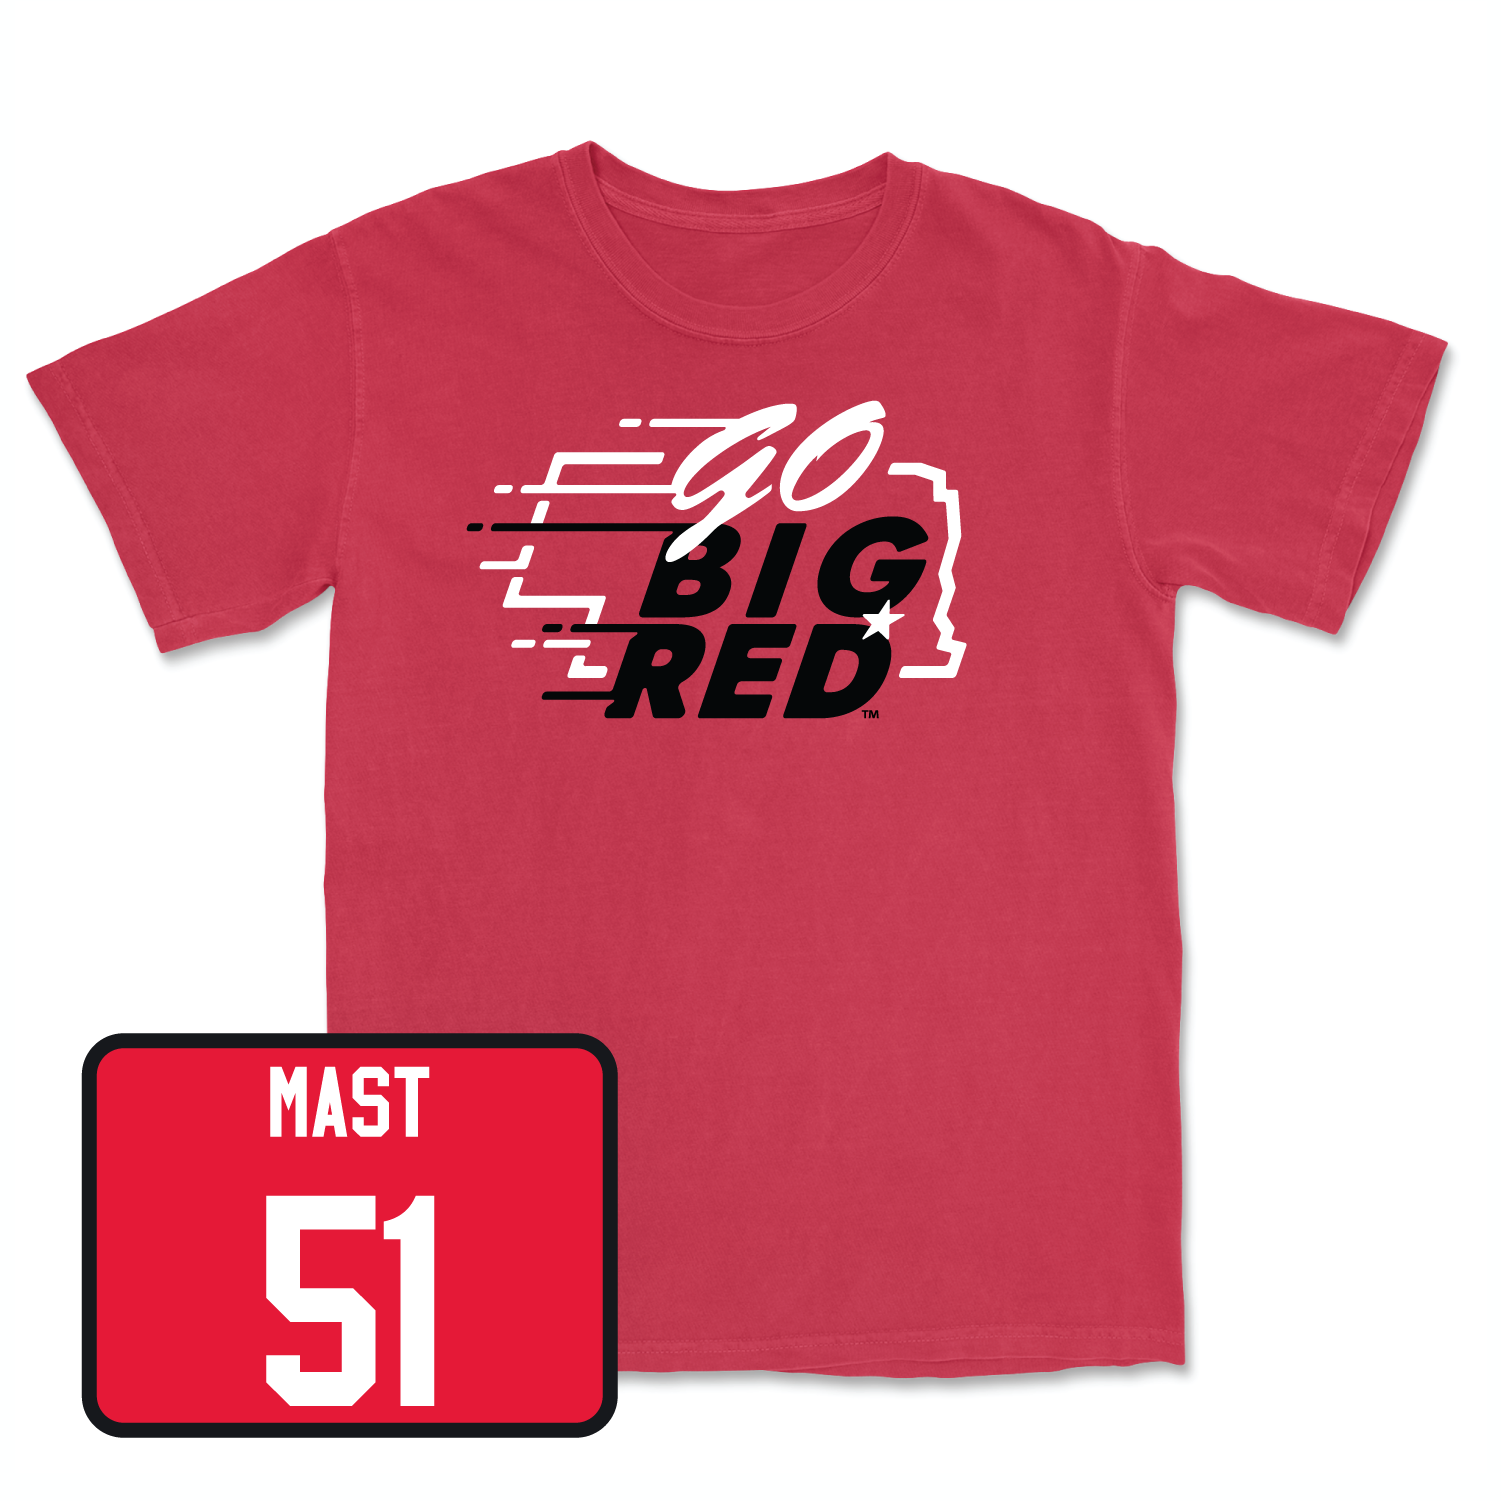 Red Men's Basketball GBR Tee 3X-Large / Rienk Mast | #51